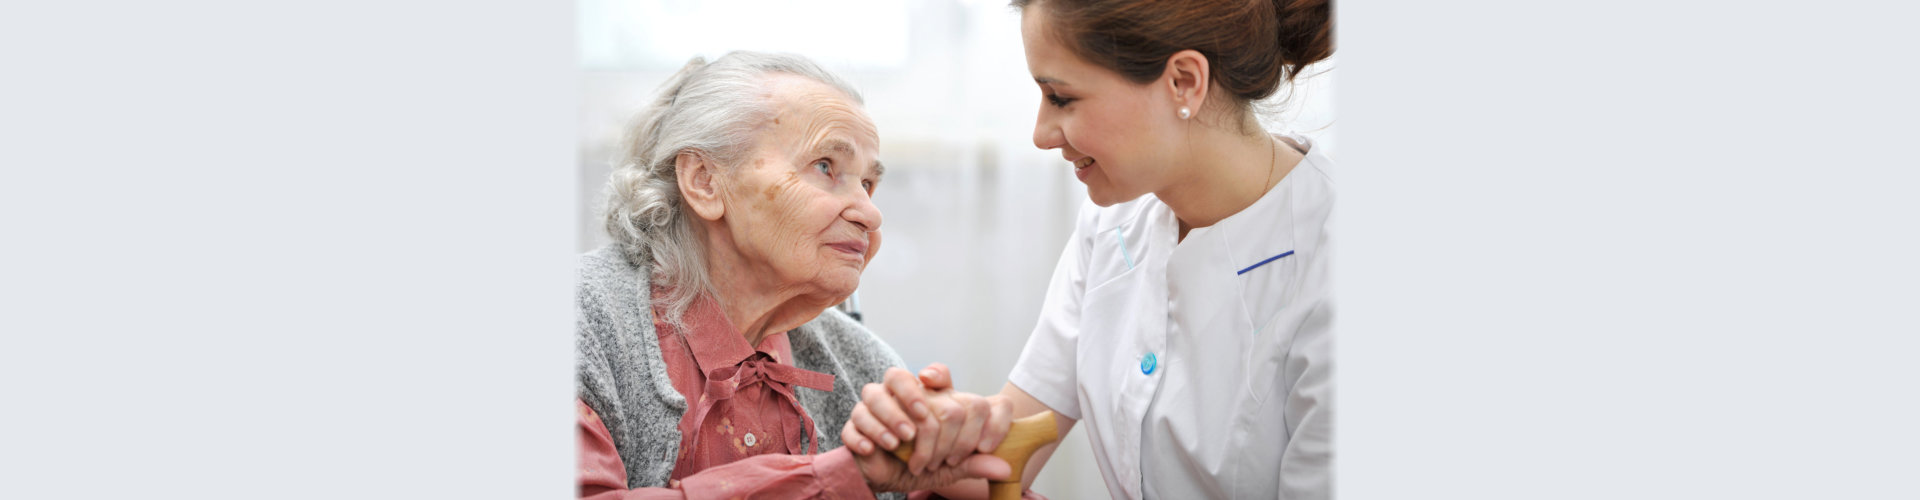 caregiver with an elderly patient